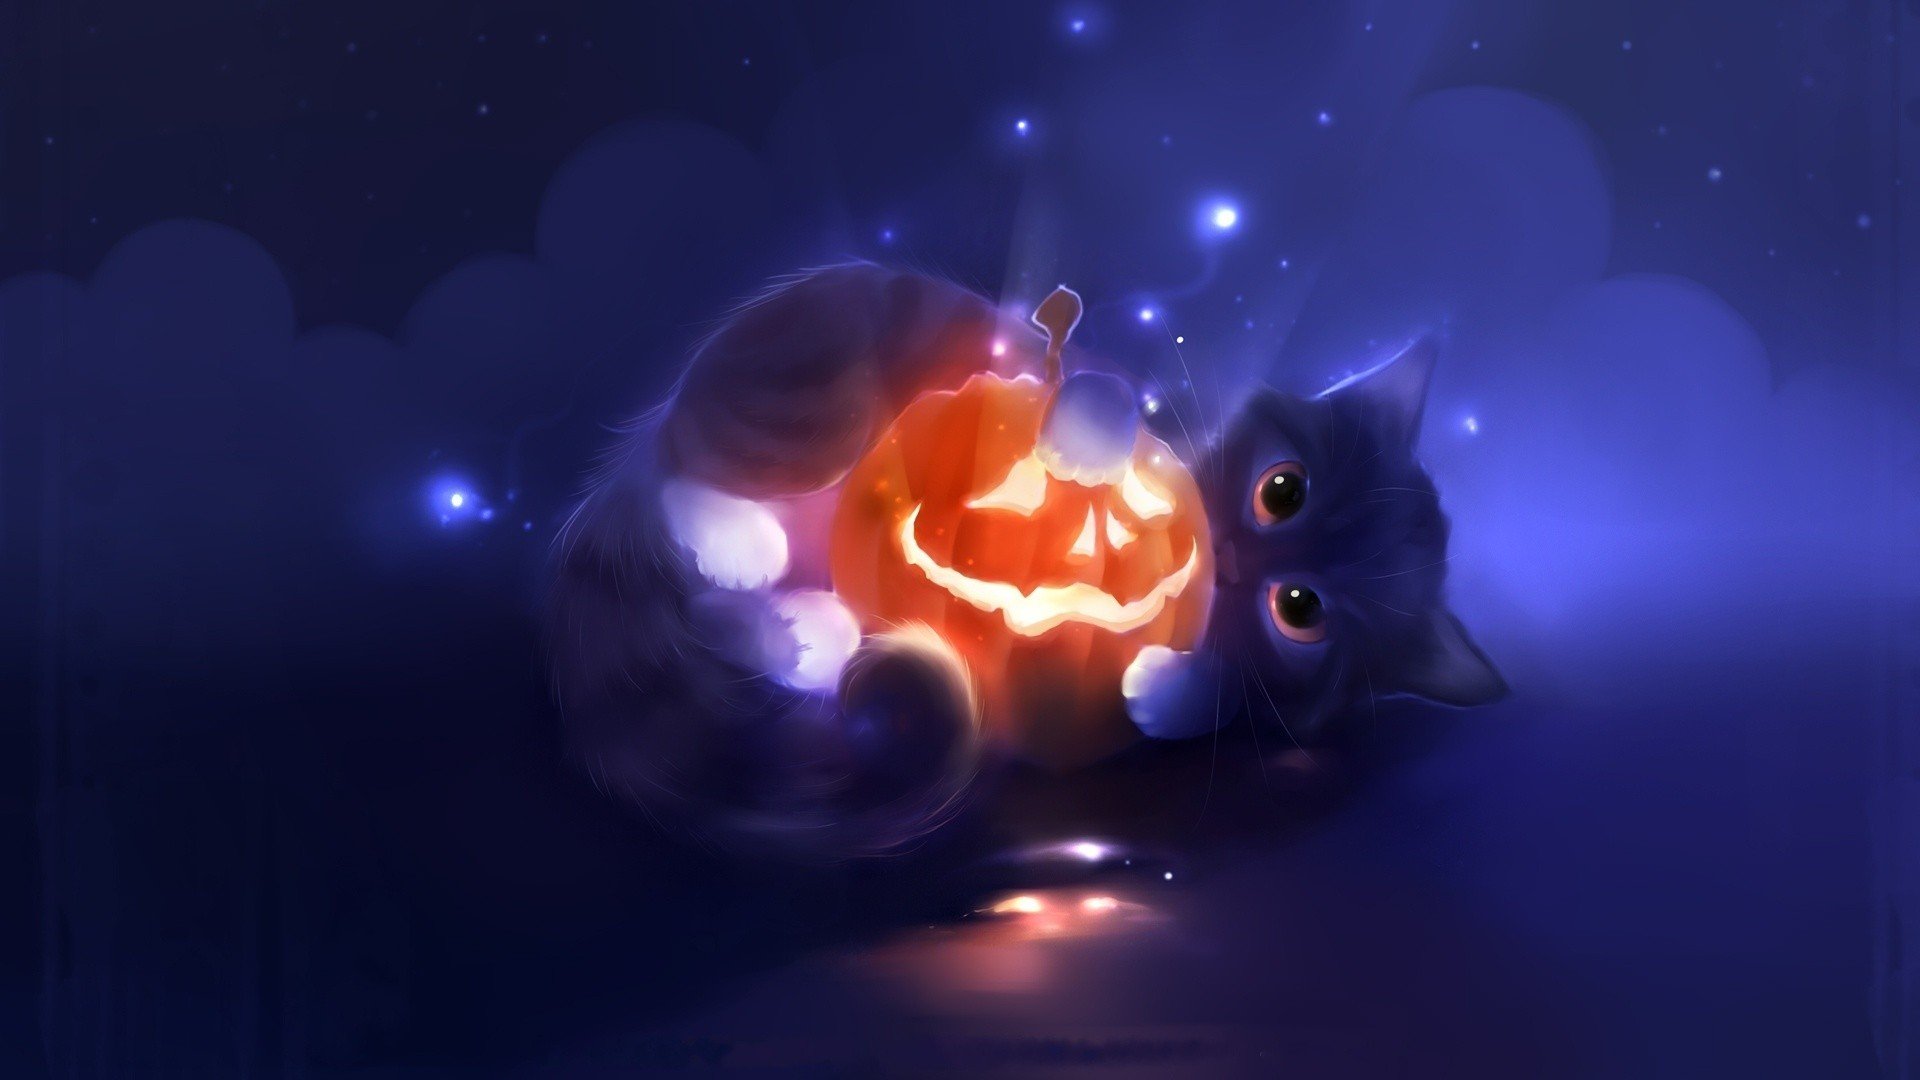 7 Halloween Hd Wallpapers Background Images Wallpaper Abyss